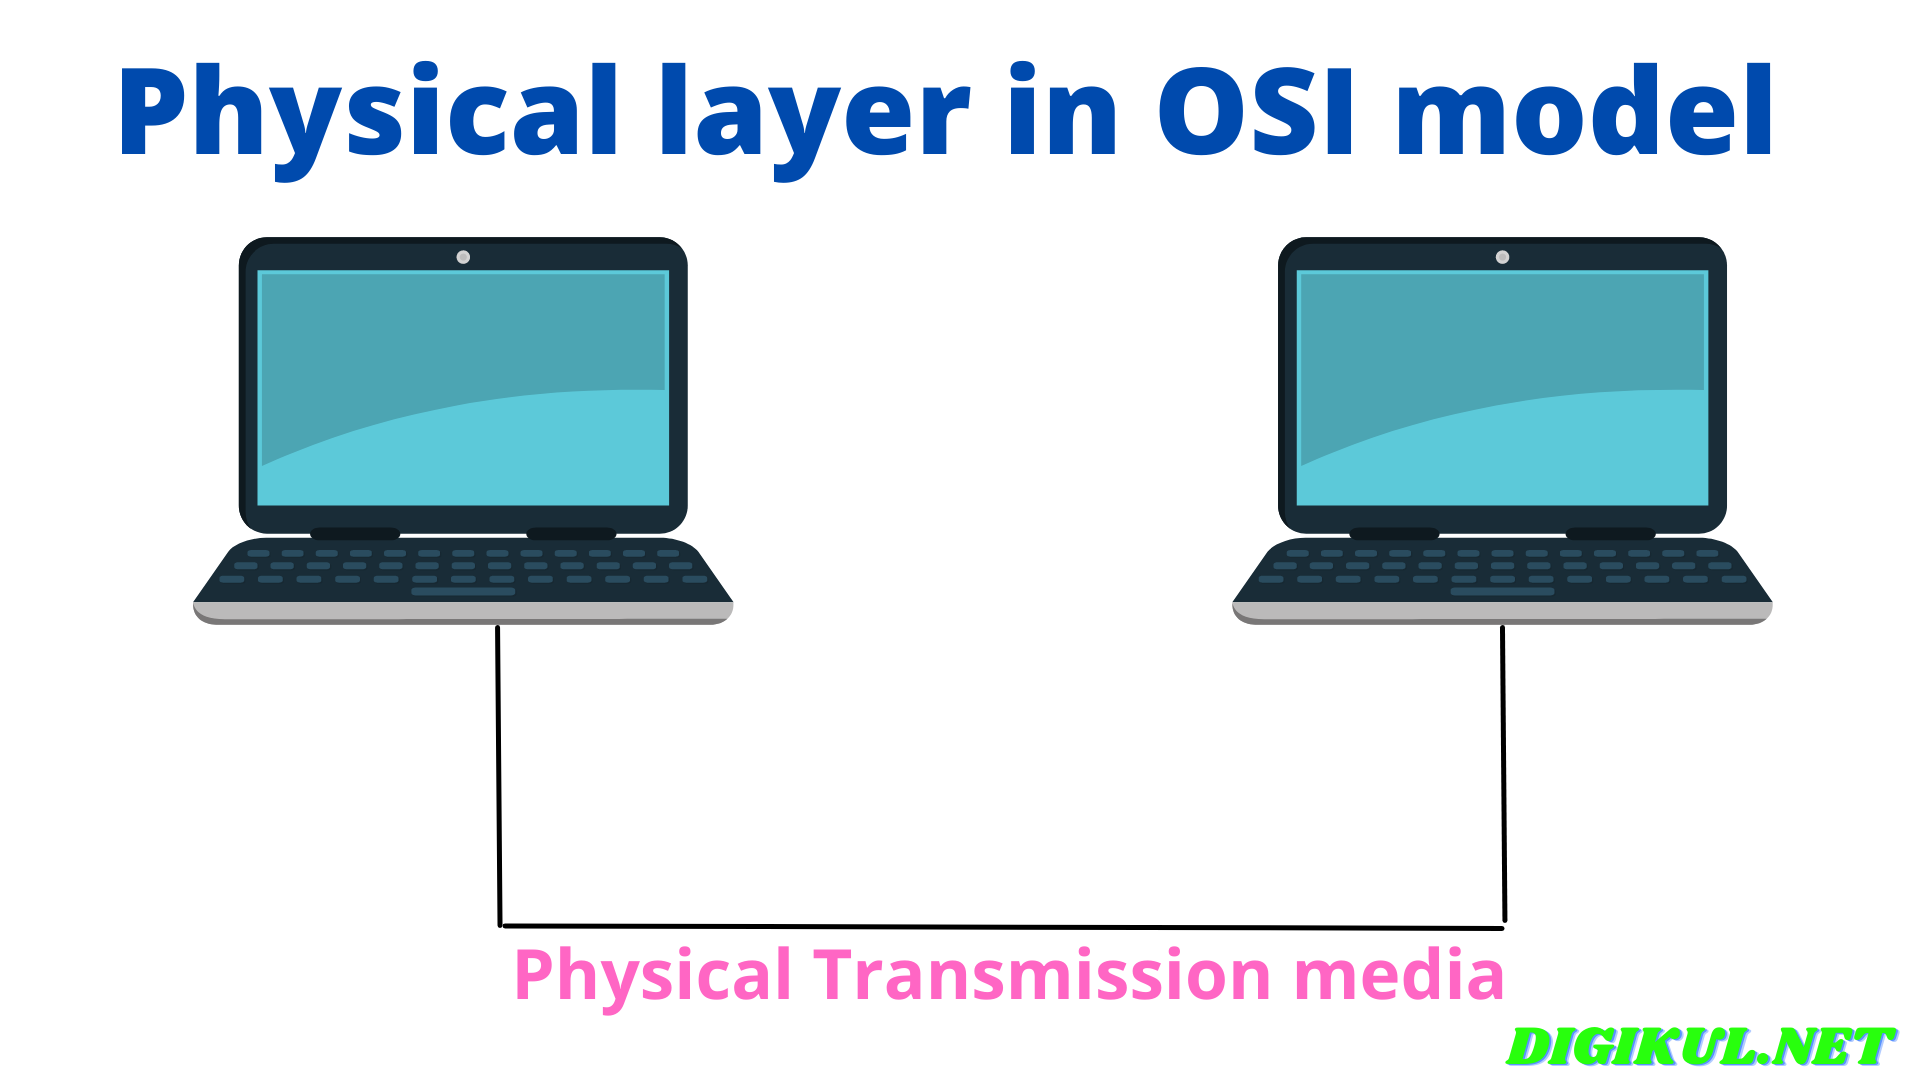 functions of Physical layer